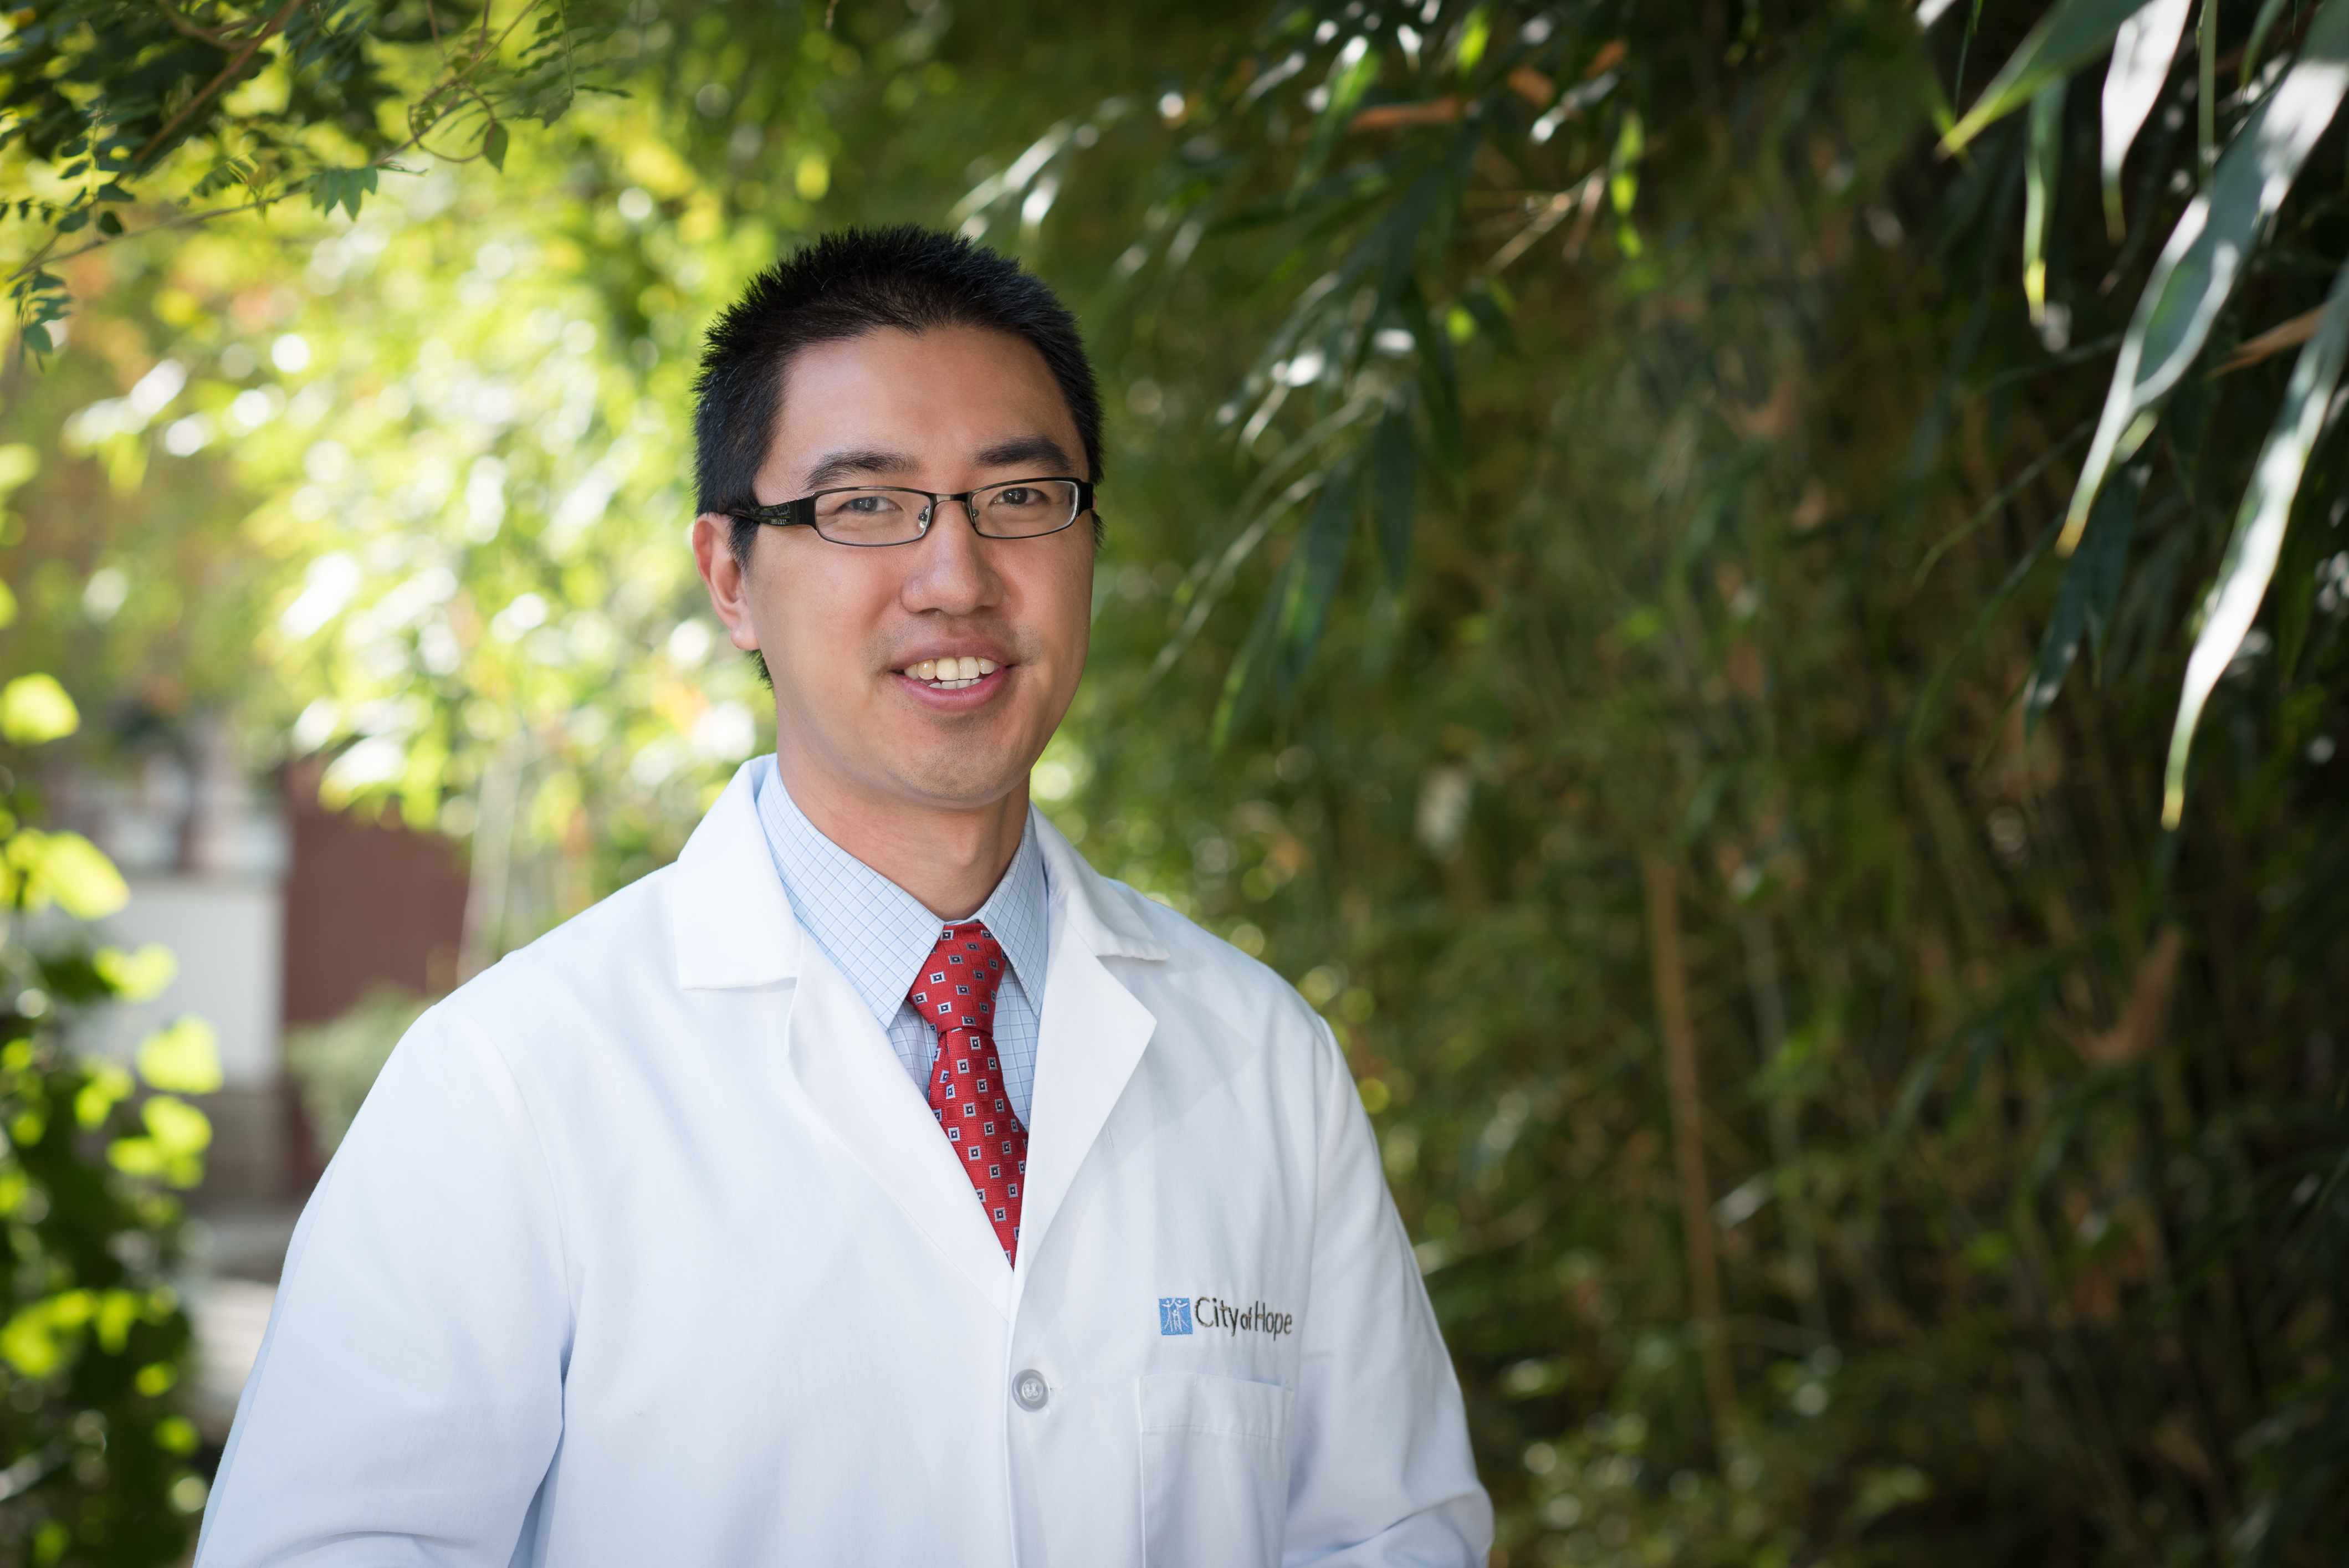 Daneng Li, MD, Associate Professor in the Department of Medical Oncology & Therapeutics Research at City of Hope